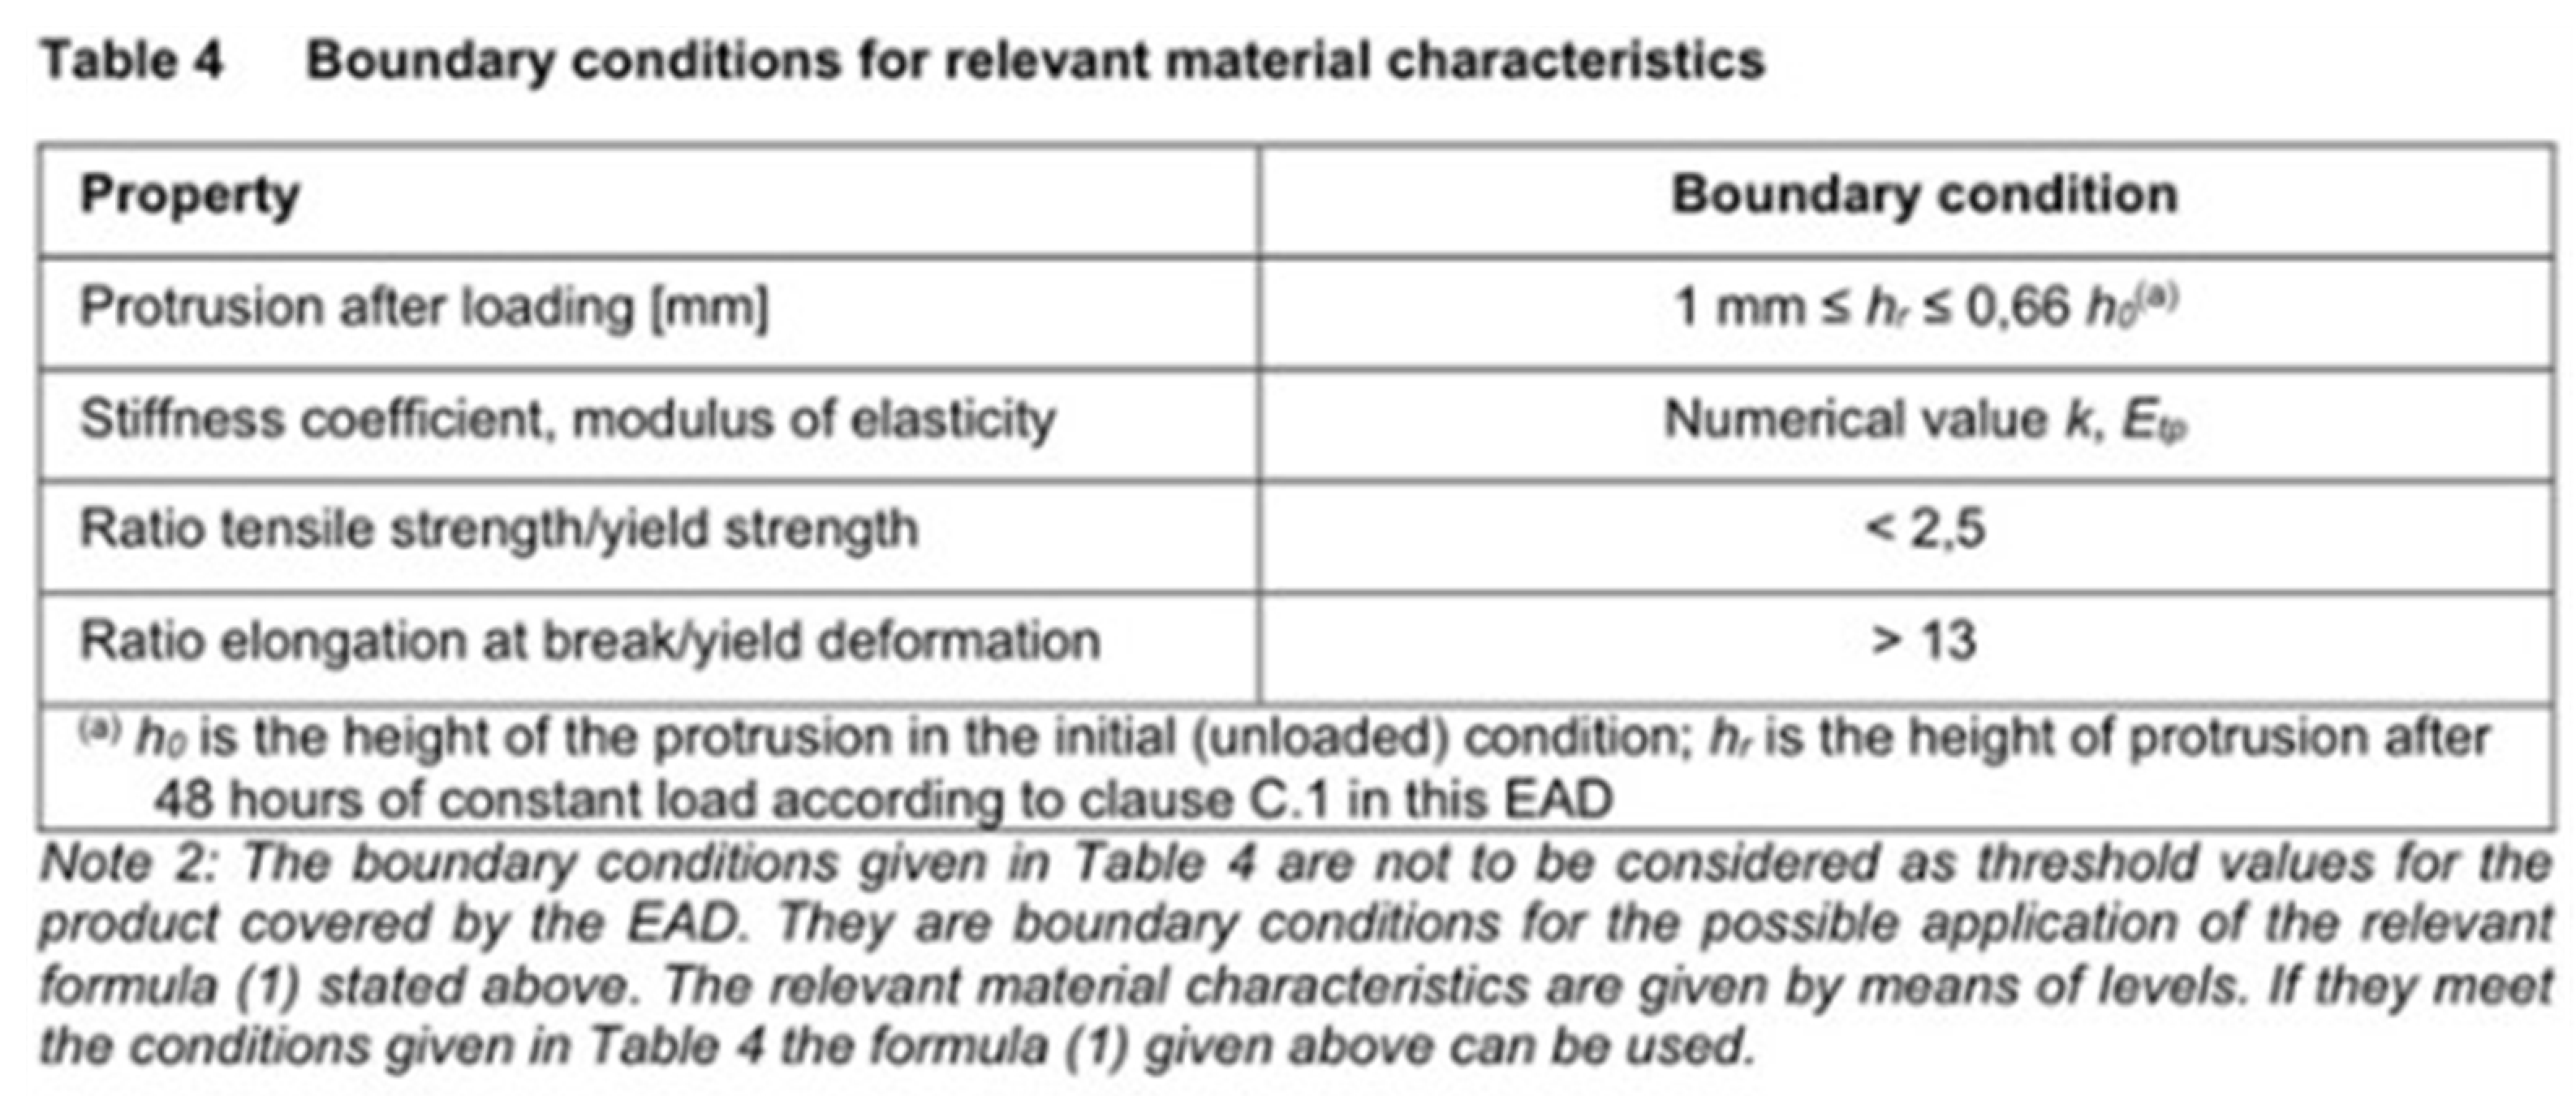 Boundary Conditions for relevant material characteristics